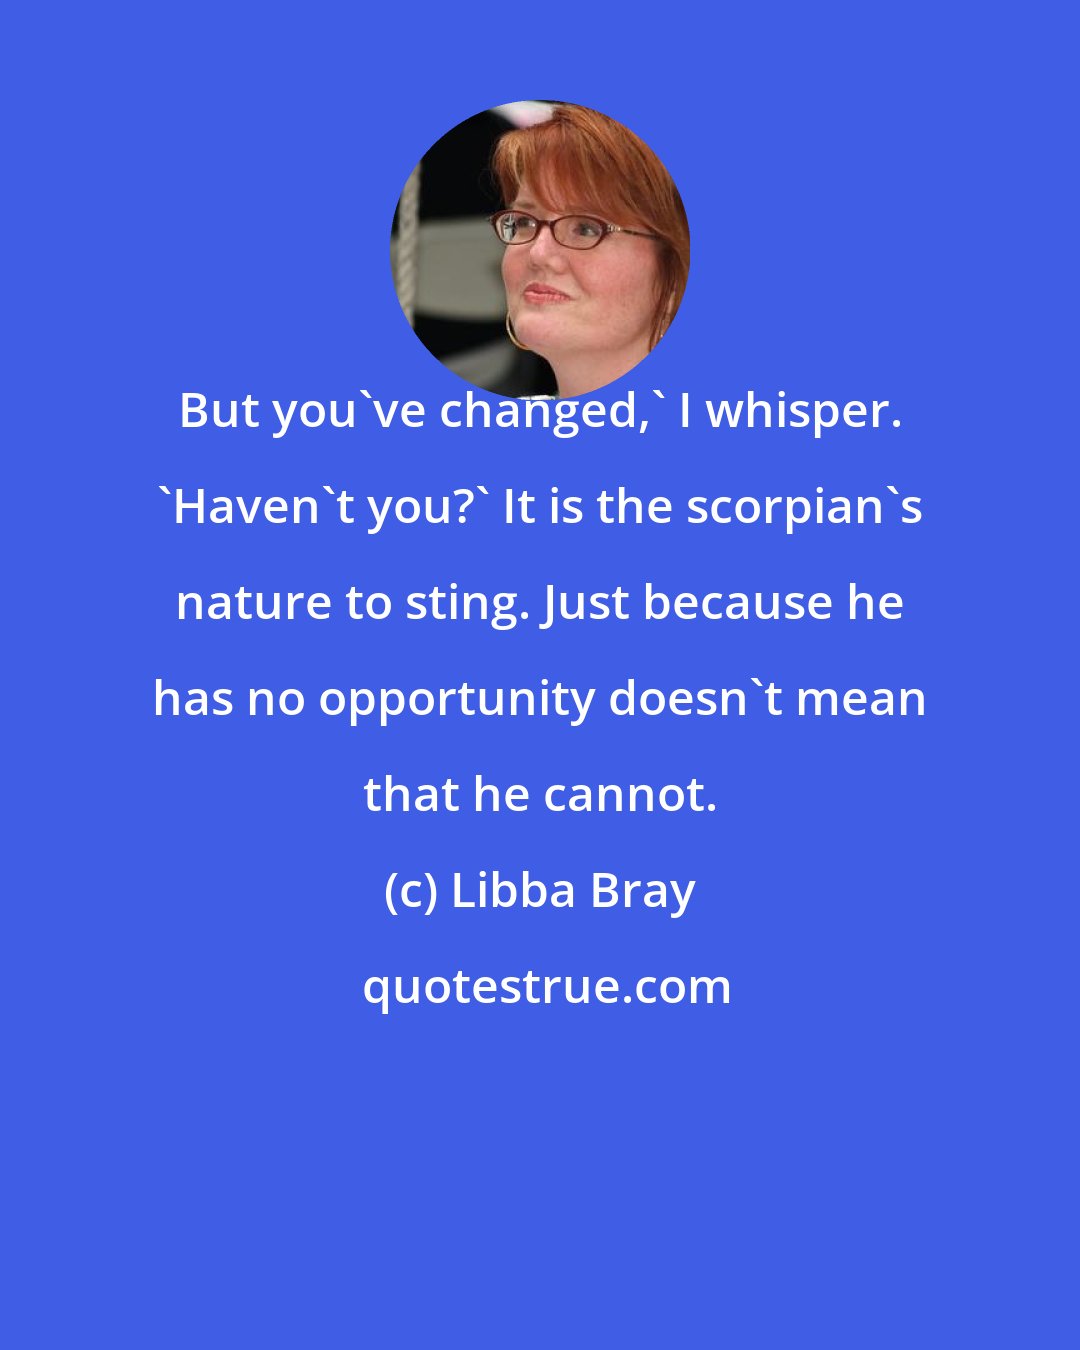 Libba Bray: But you've changed,' I whisper. 'Haven't you?' It is the scorpian's nature to sting. Just because he has no opportunity doesn't mean that he cannot.